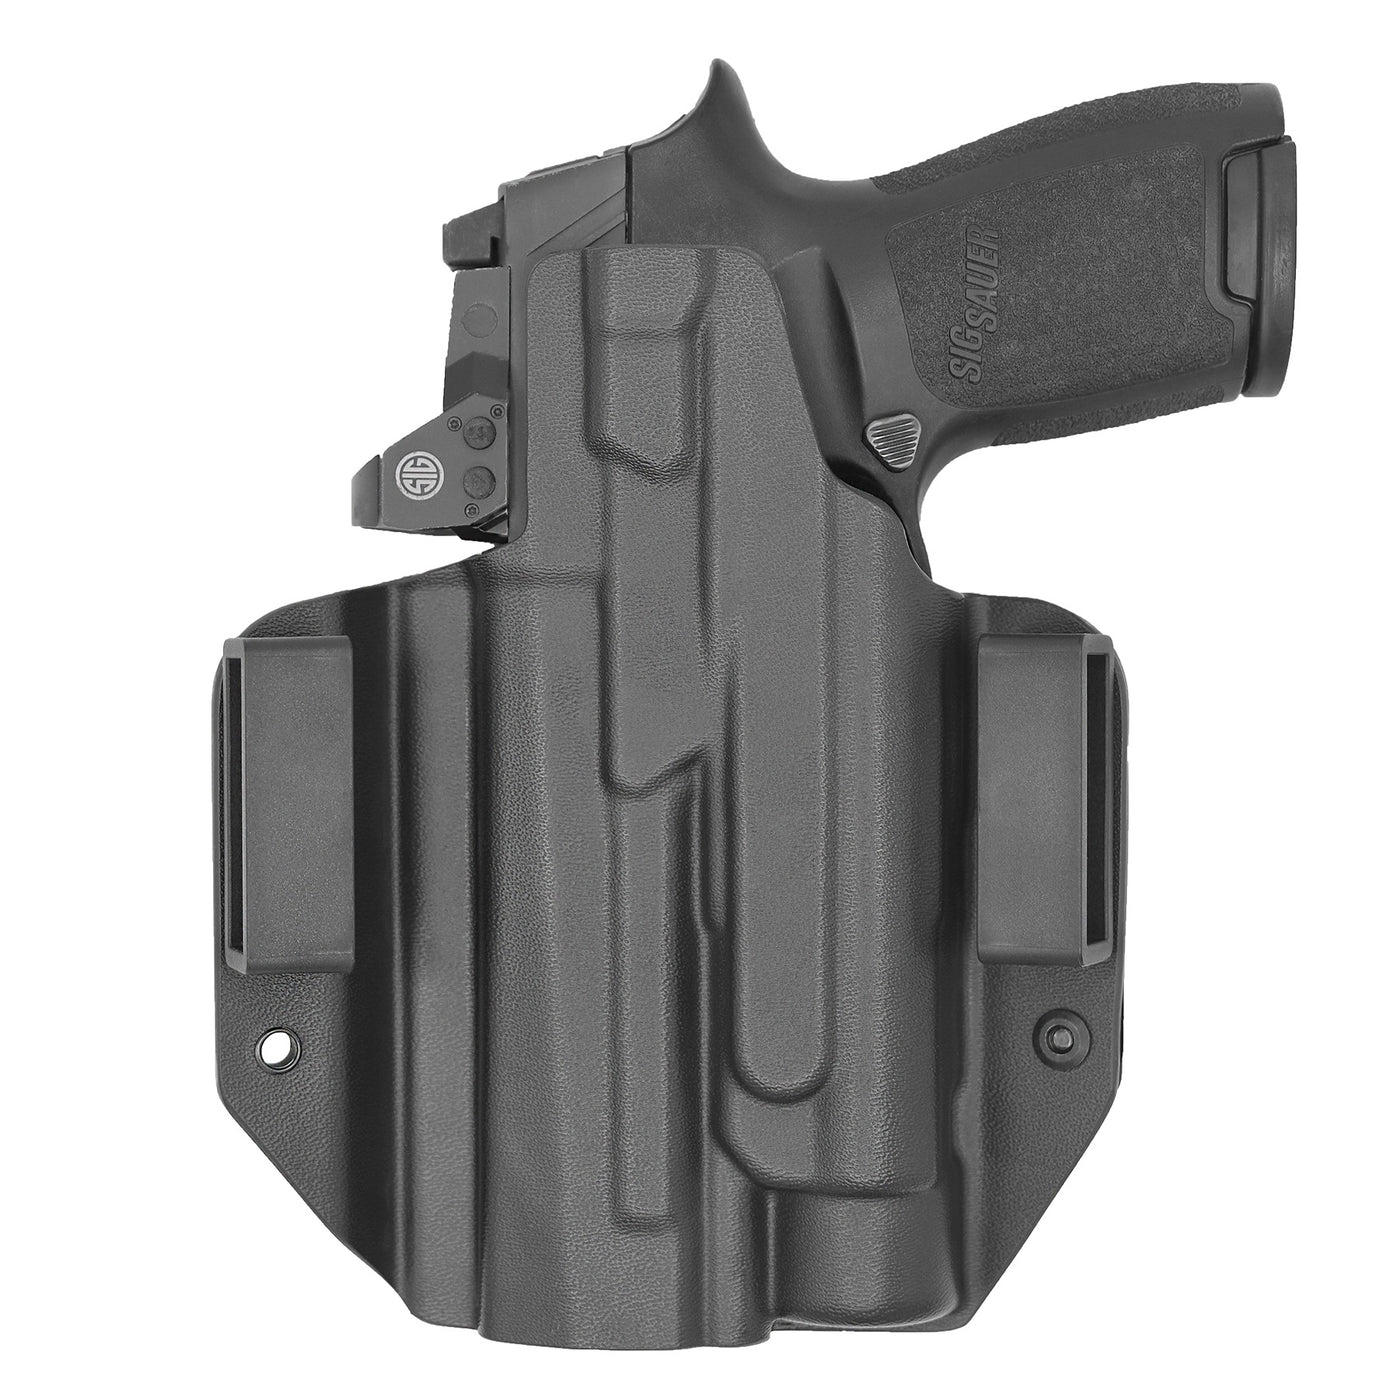 C&G Holsters custom OWB Tactical IWI Masada Streamlight TLR1 in holstered position back view